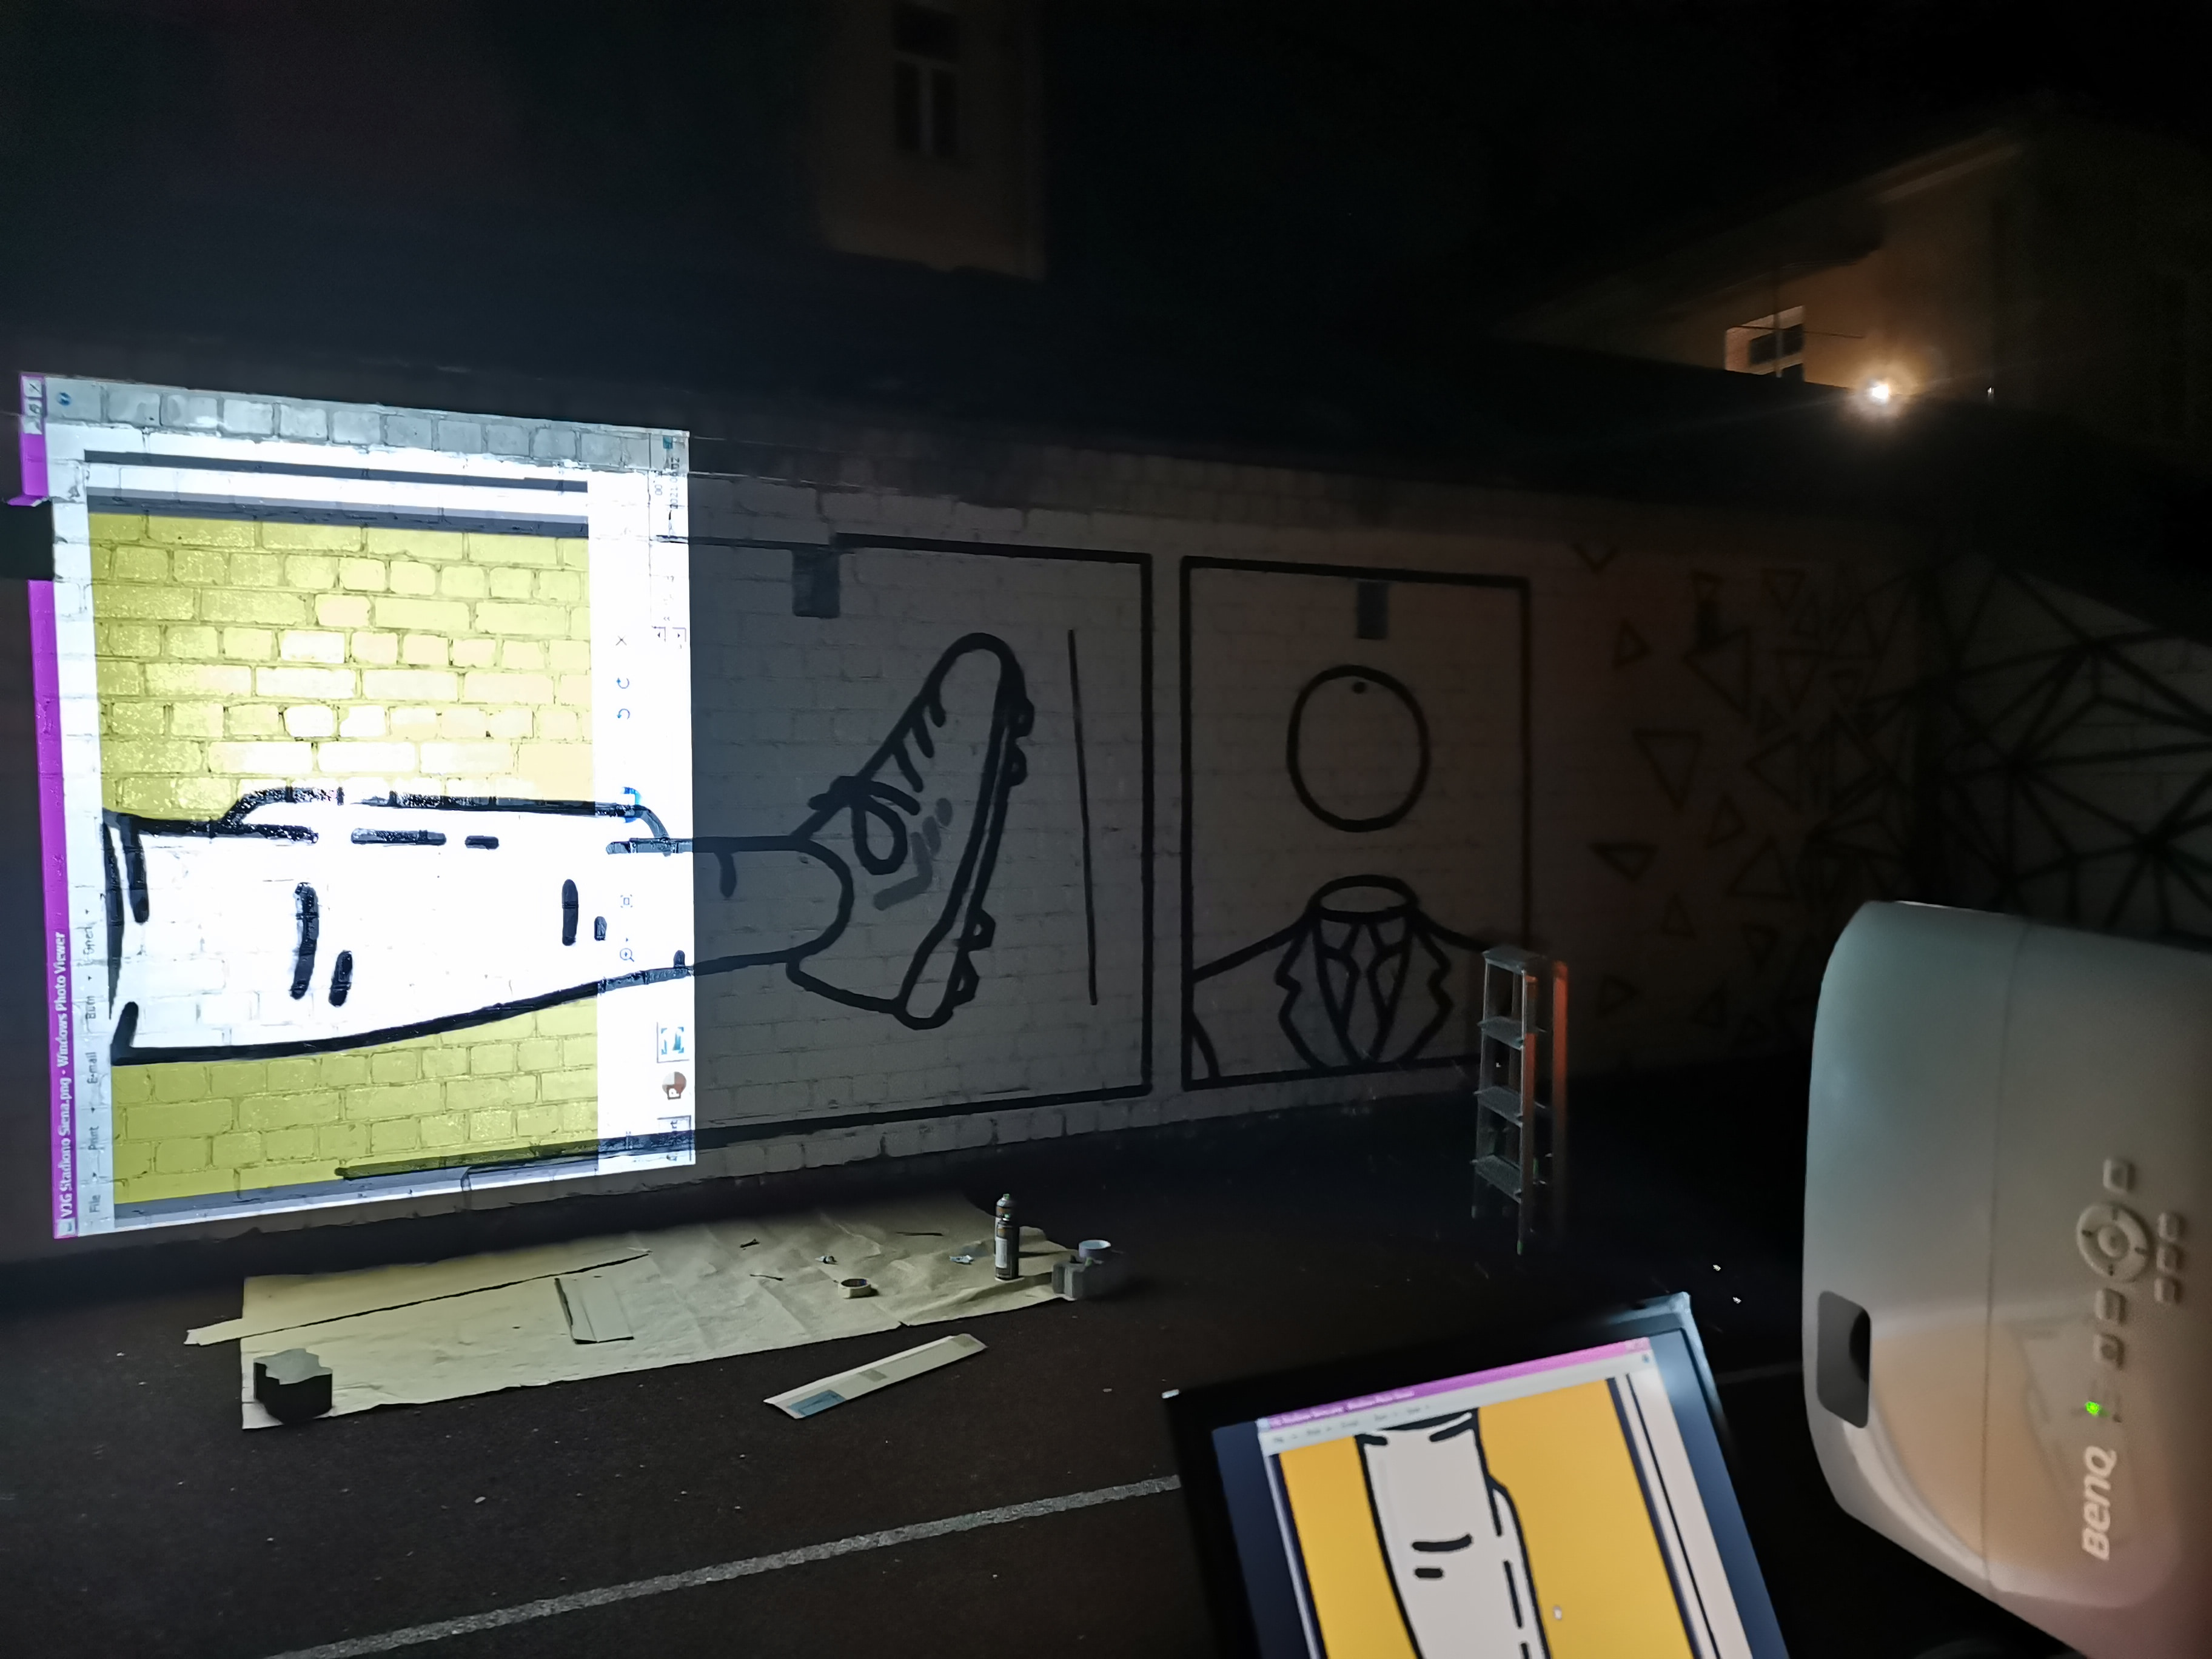 Working with a projector